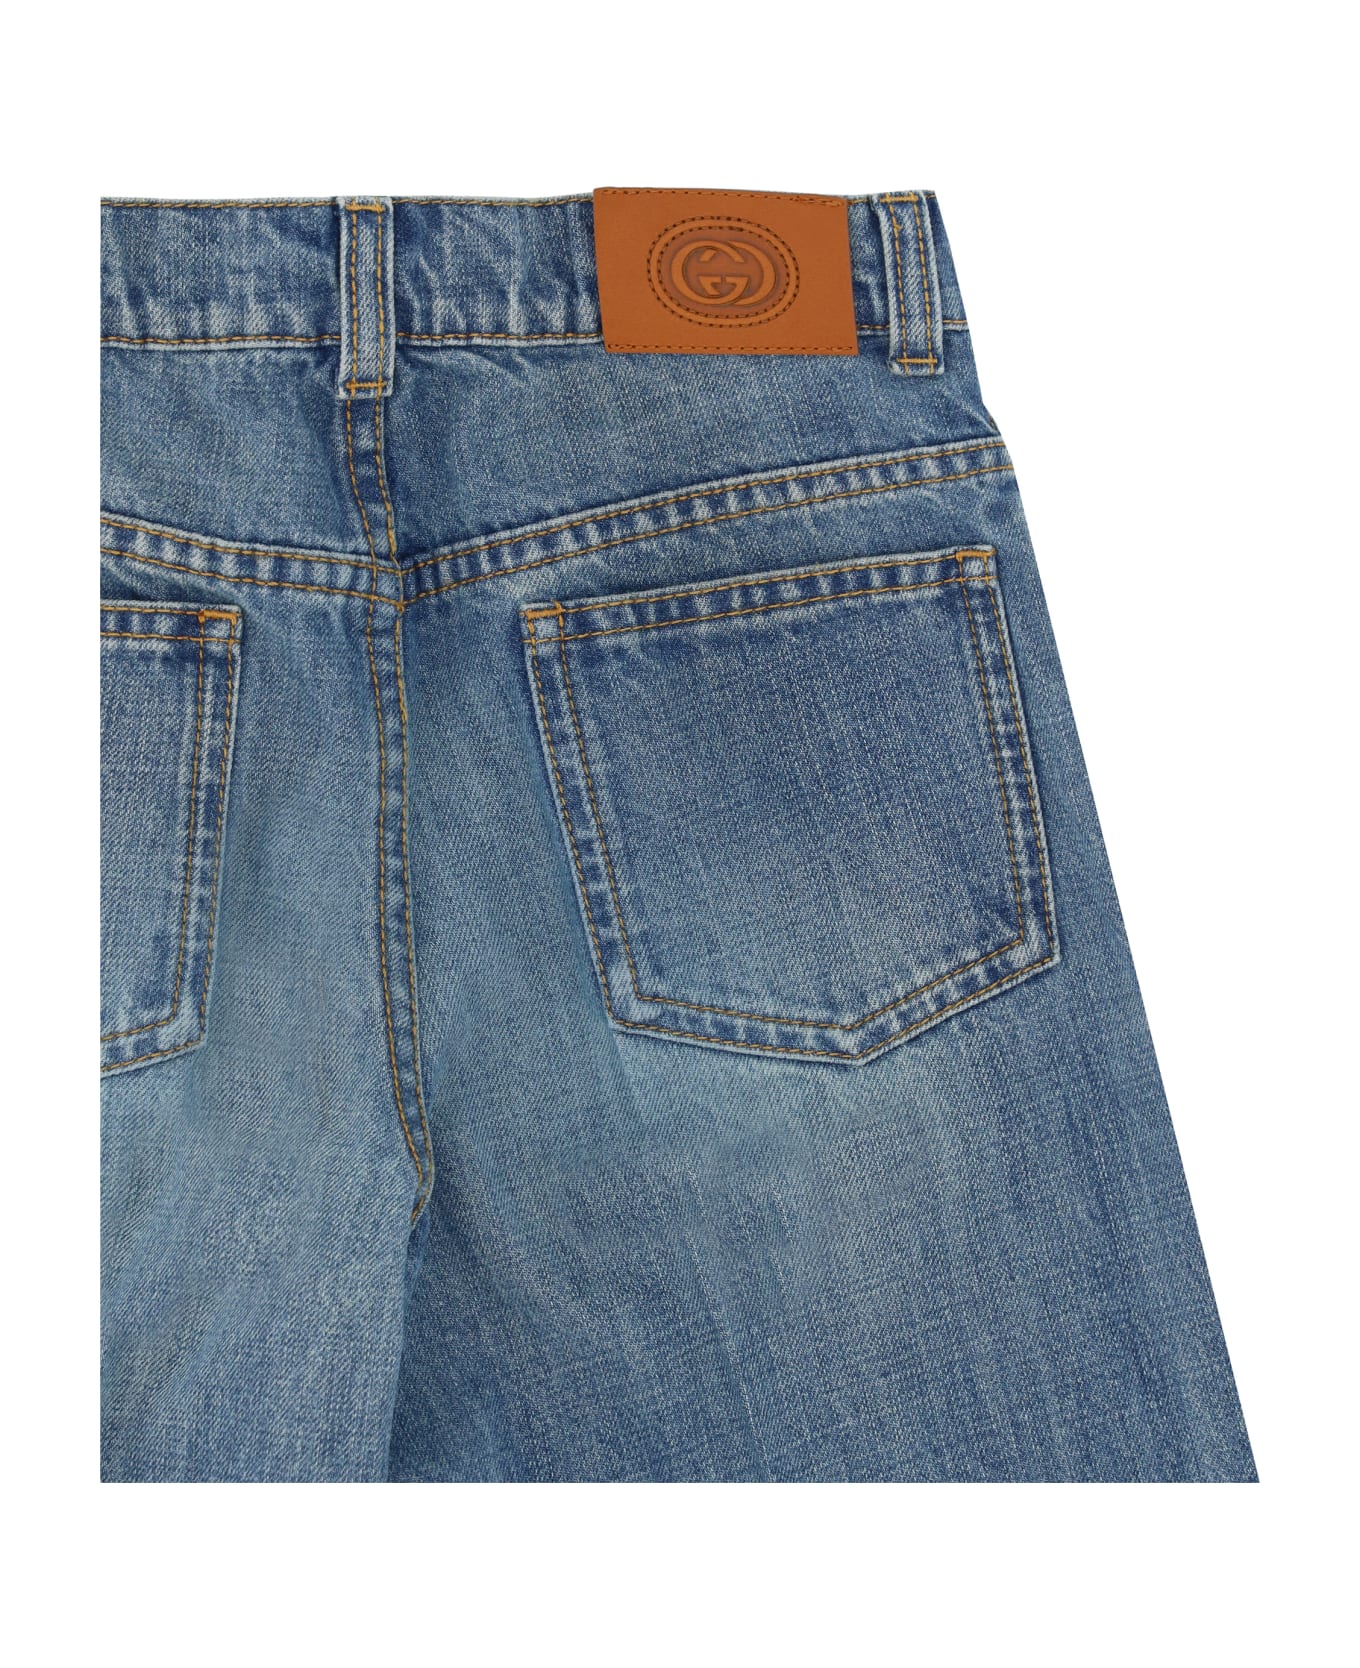 Gucci Jeans For Boy - Light Blue/mix ボトムス